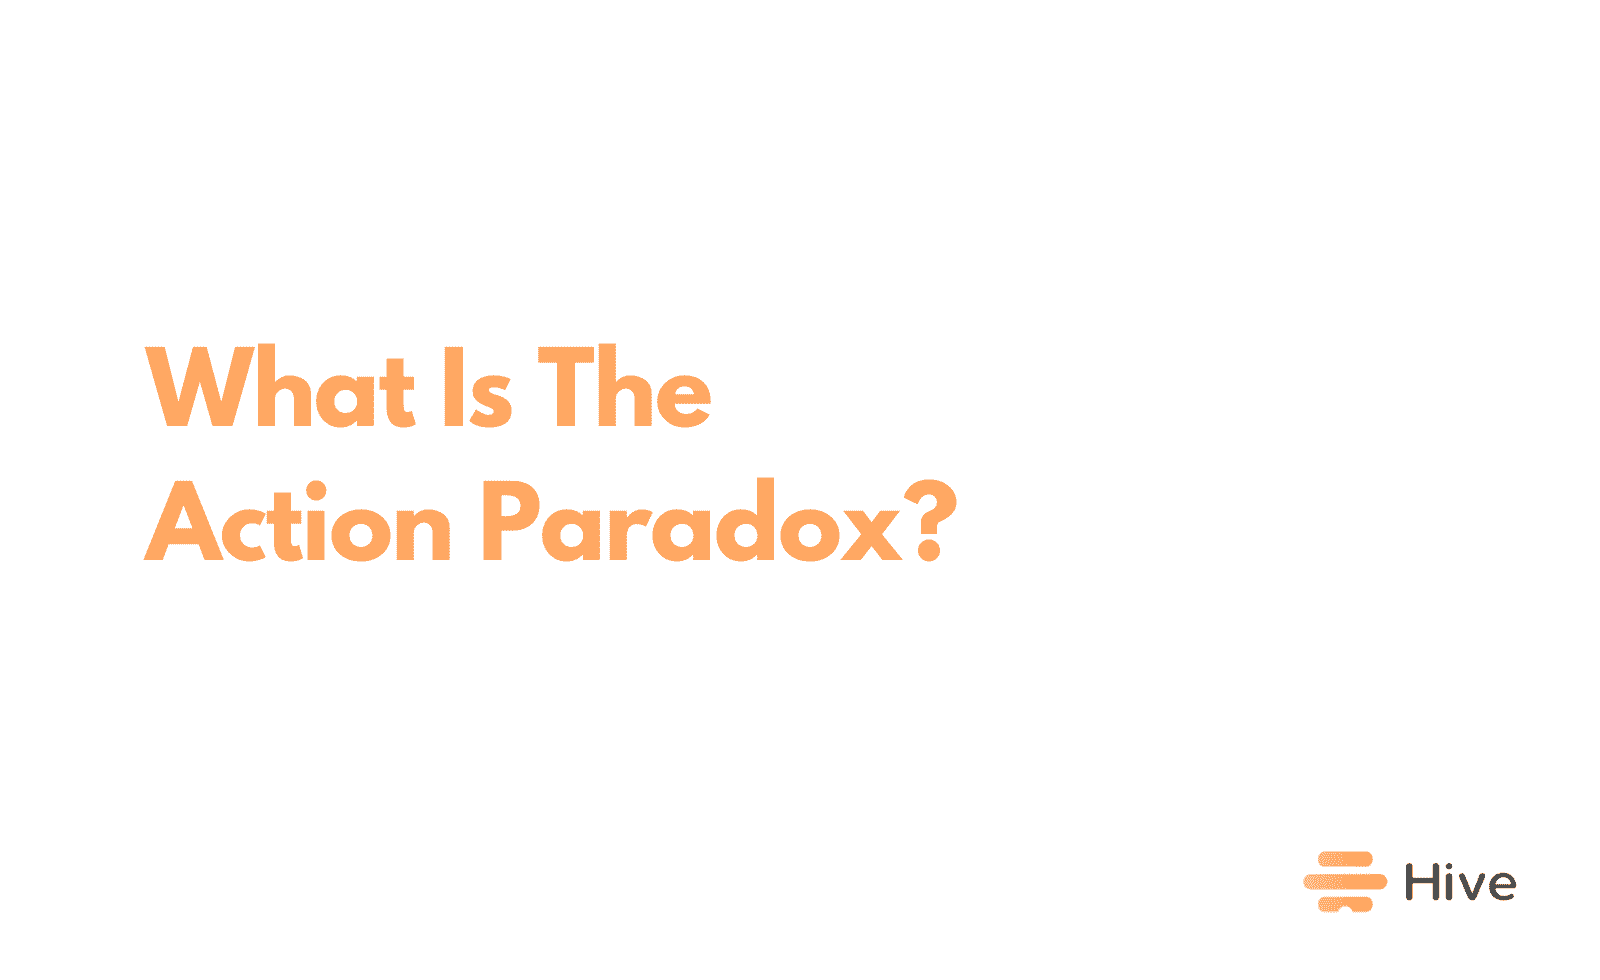 the action paradox